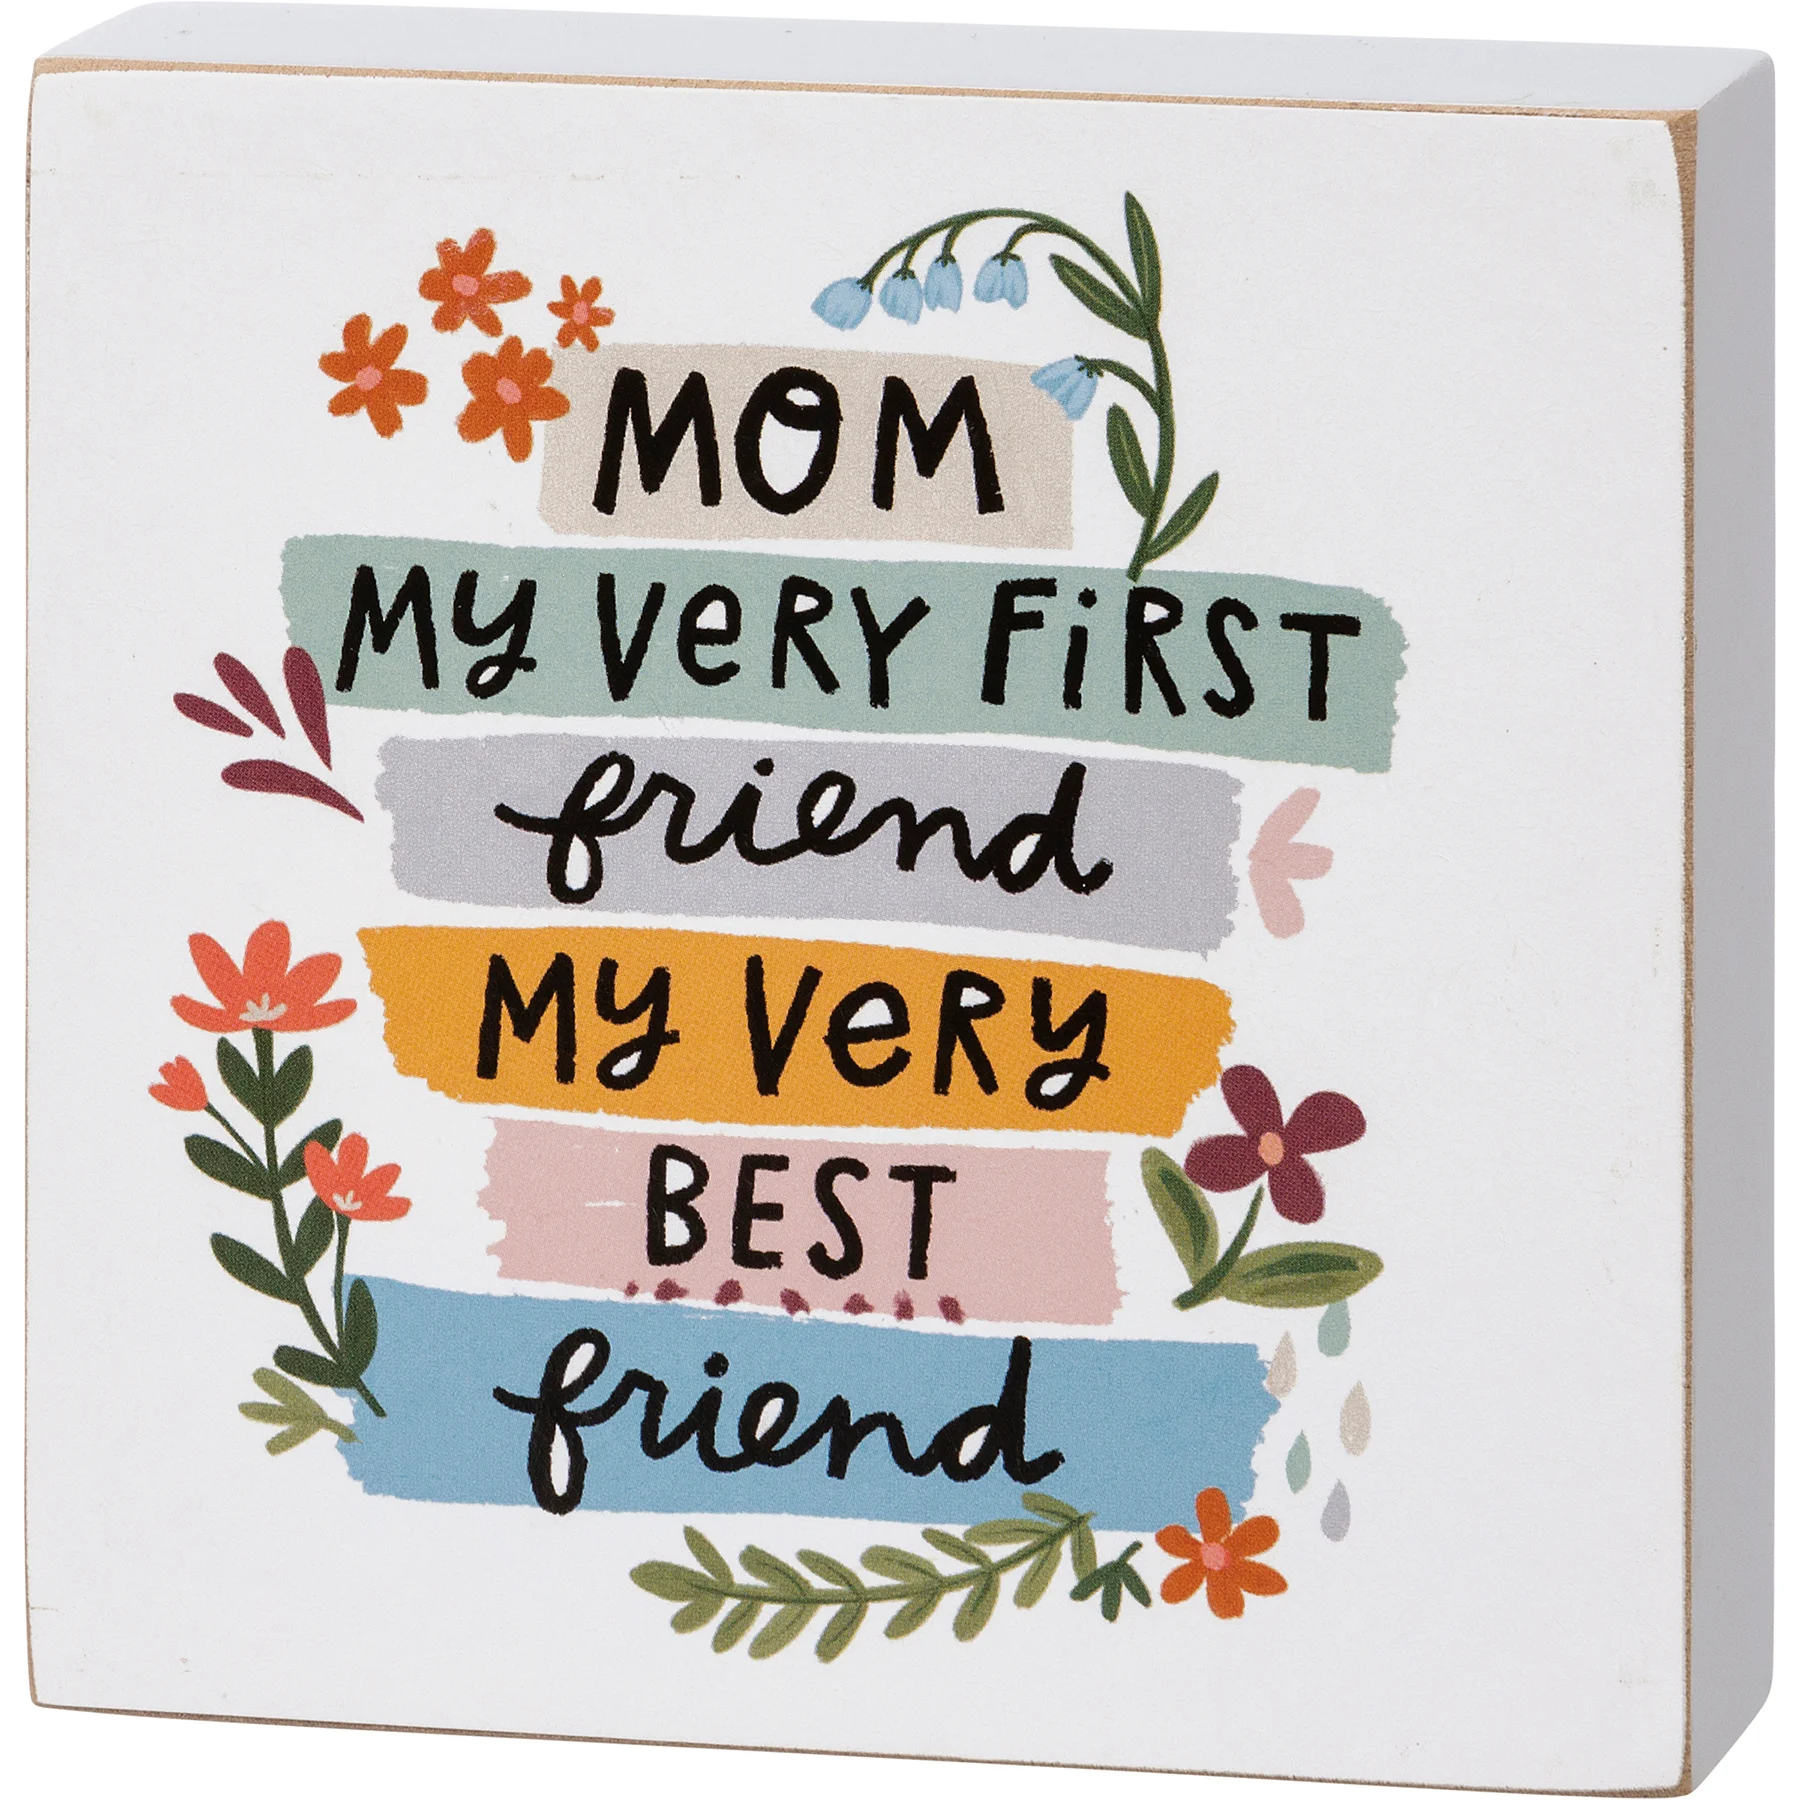 Mom is best friend ever